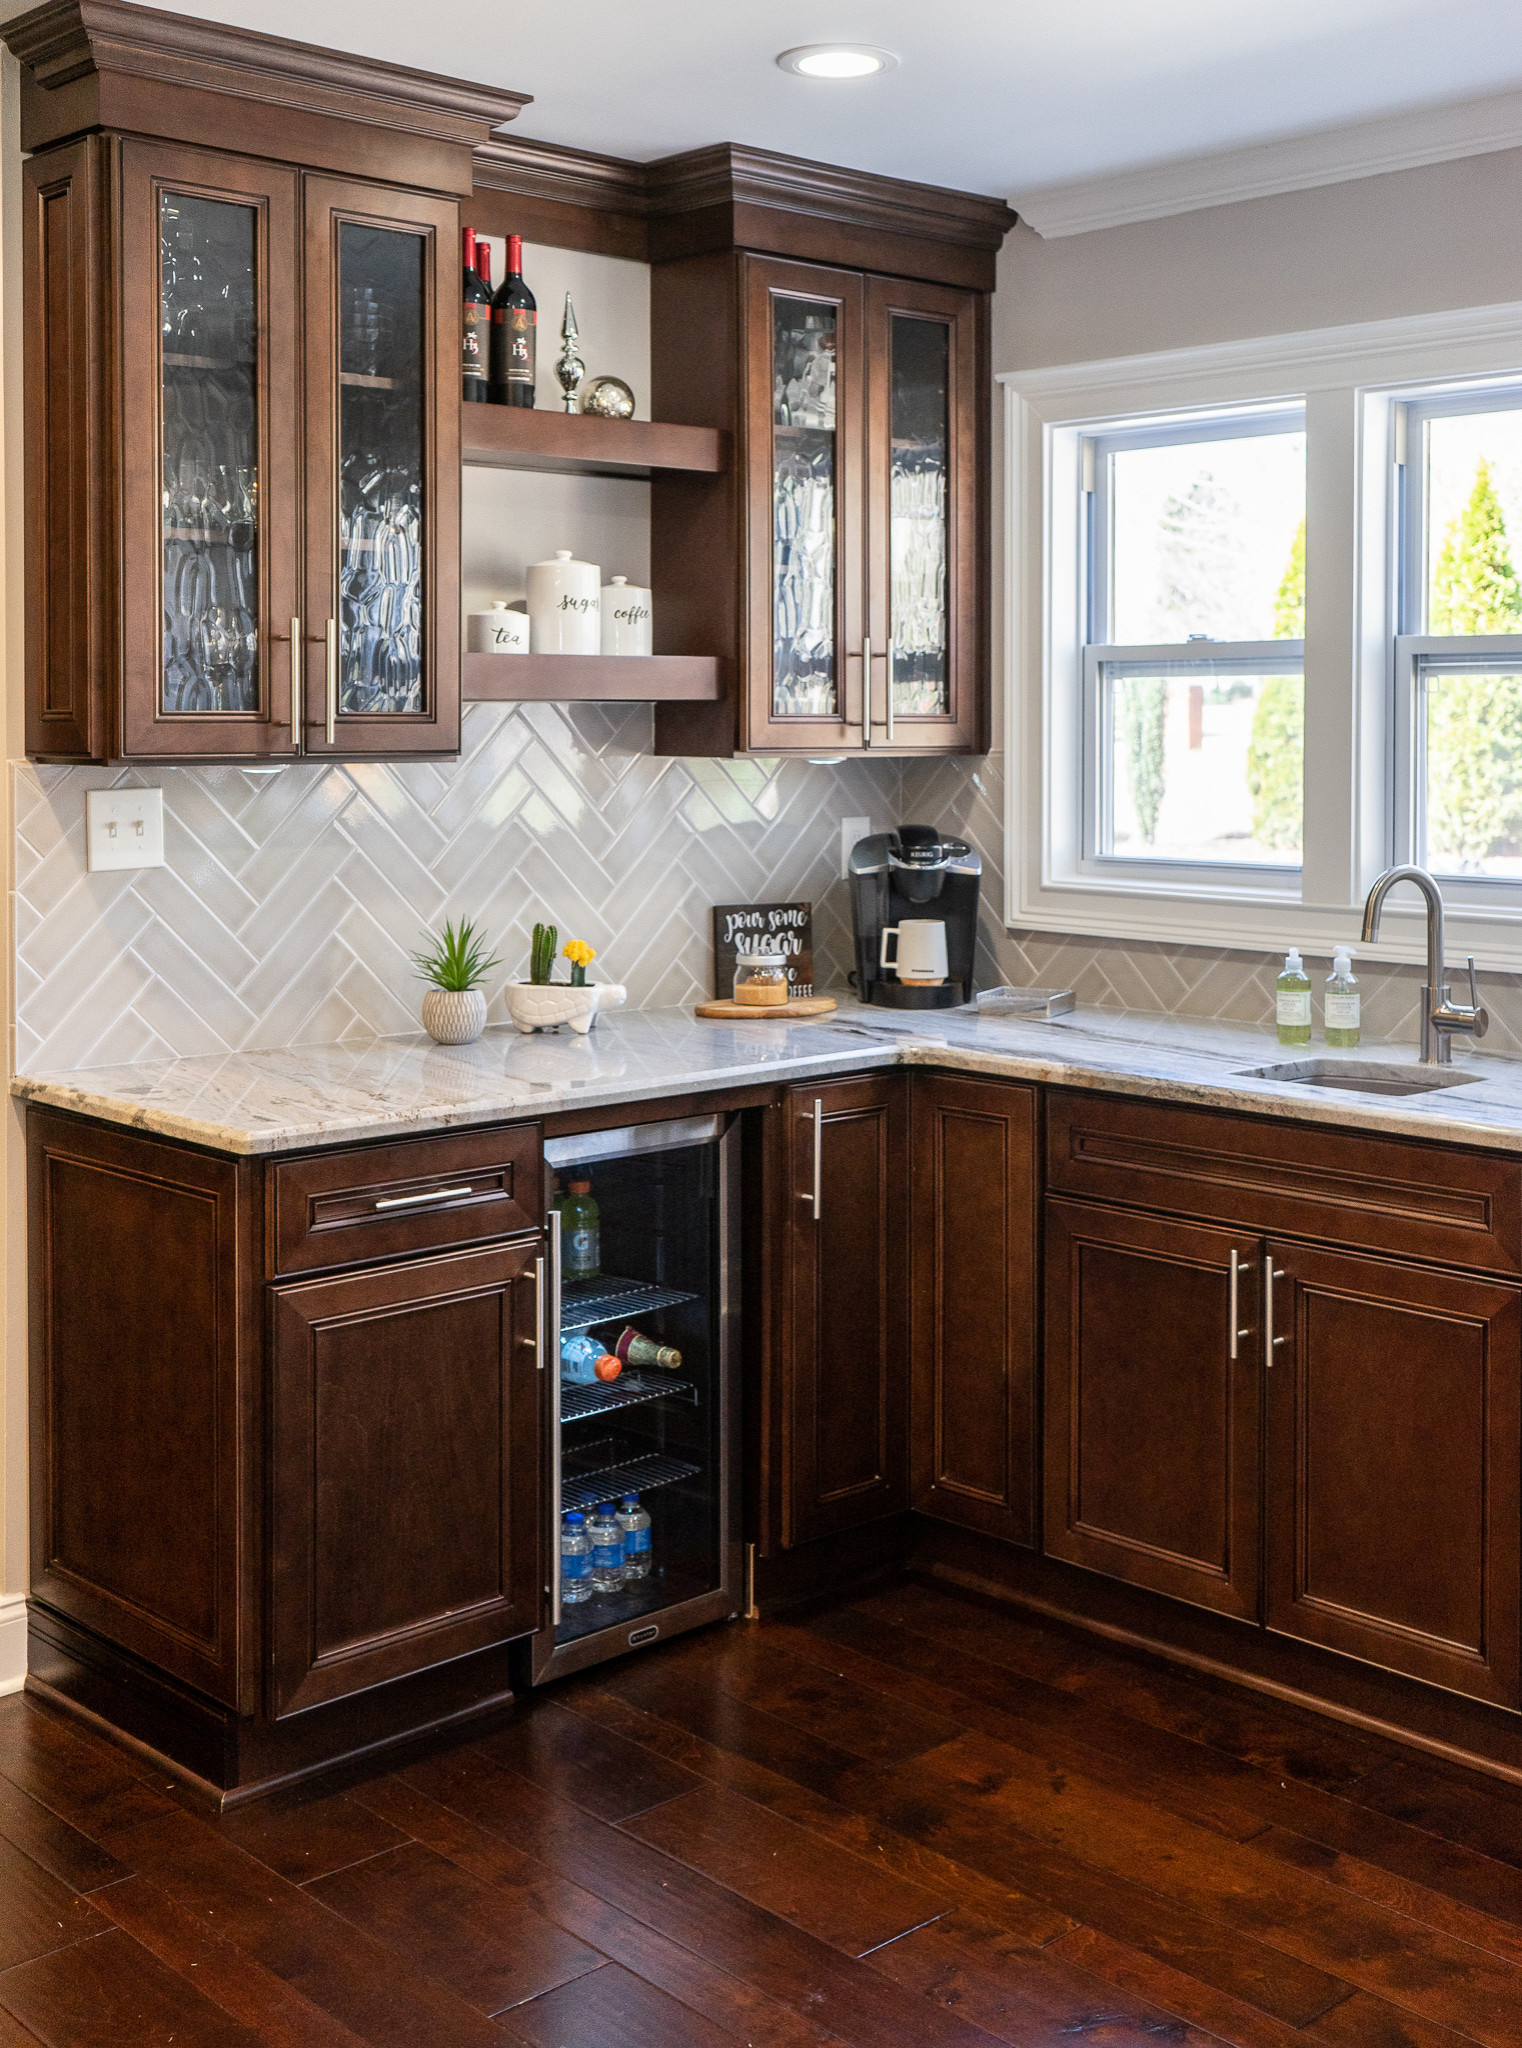 18 Kitchen with Brown Cabinets Ideas You'll Love   August, 18 ...